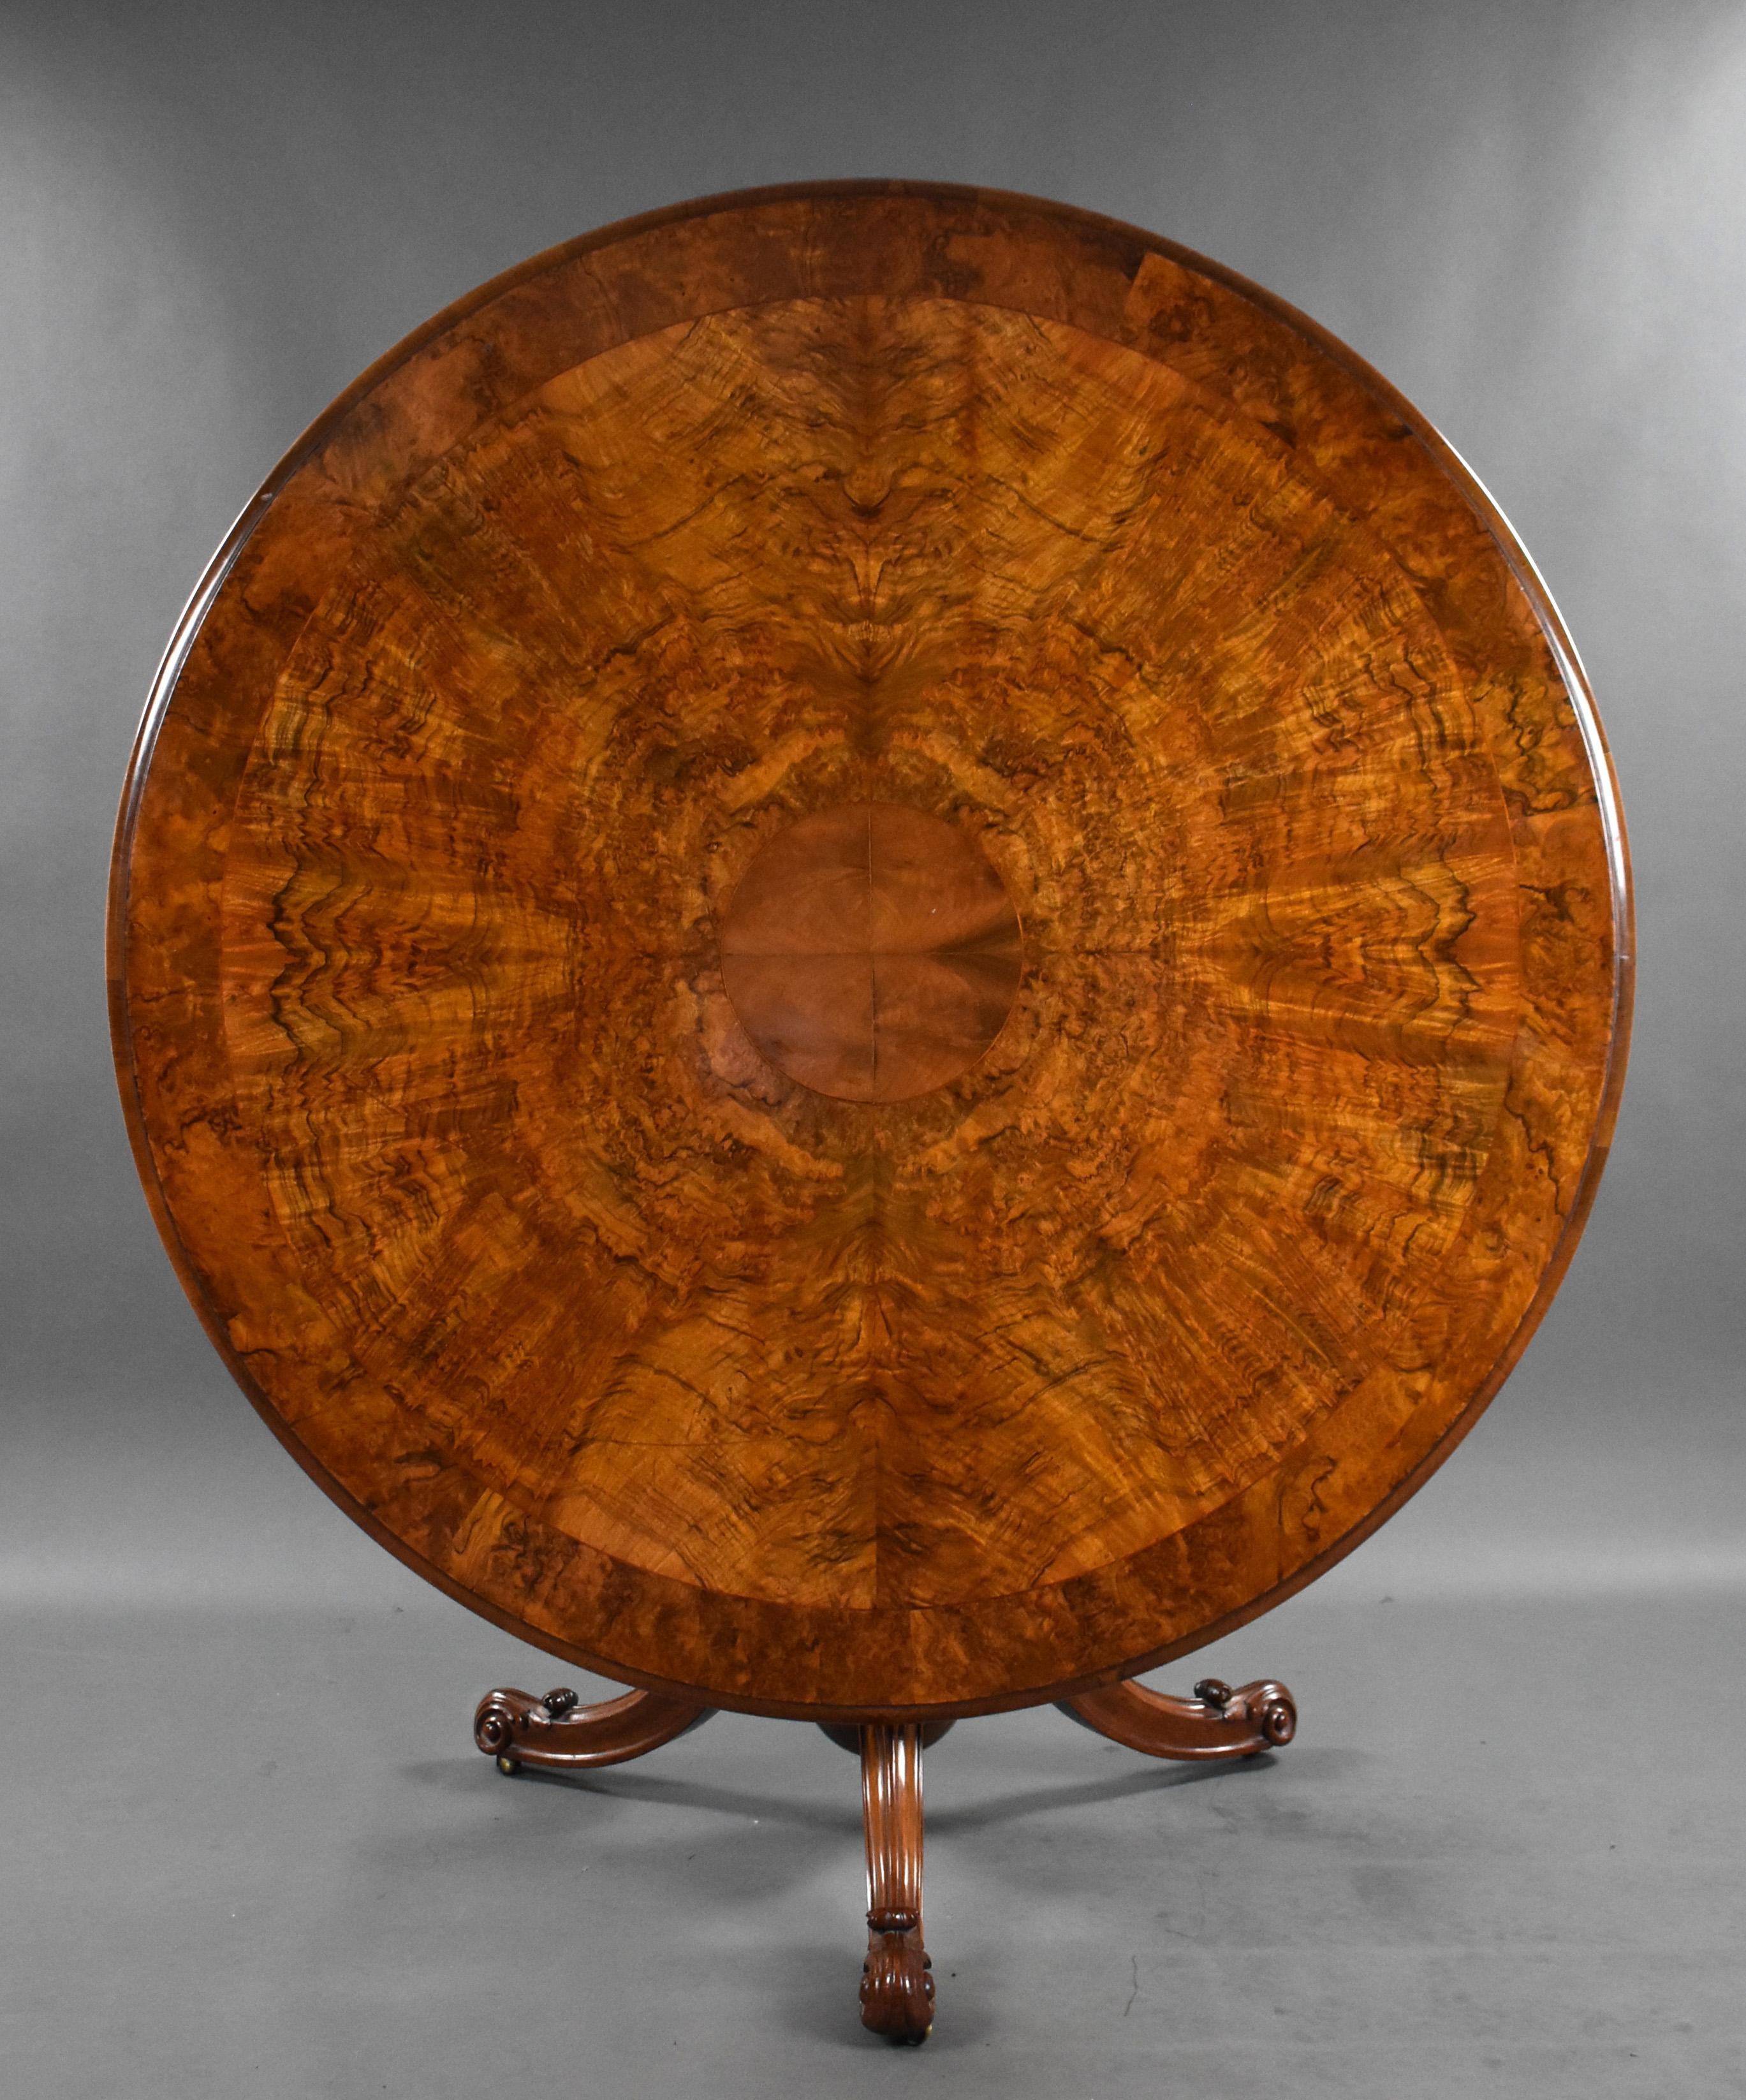 For sale is a good quality mid-19th century Victorian antique burr walnut circular breakfast table, having a cross grained moulded edge, with a burr walnut band enclosing further well figured burr walnut veneers, above a turned stem standing on